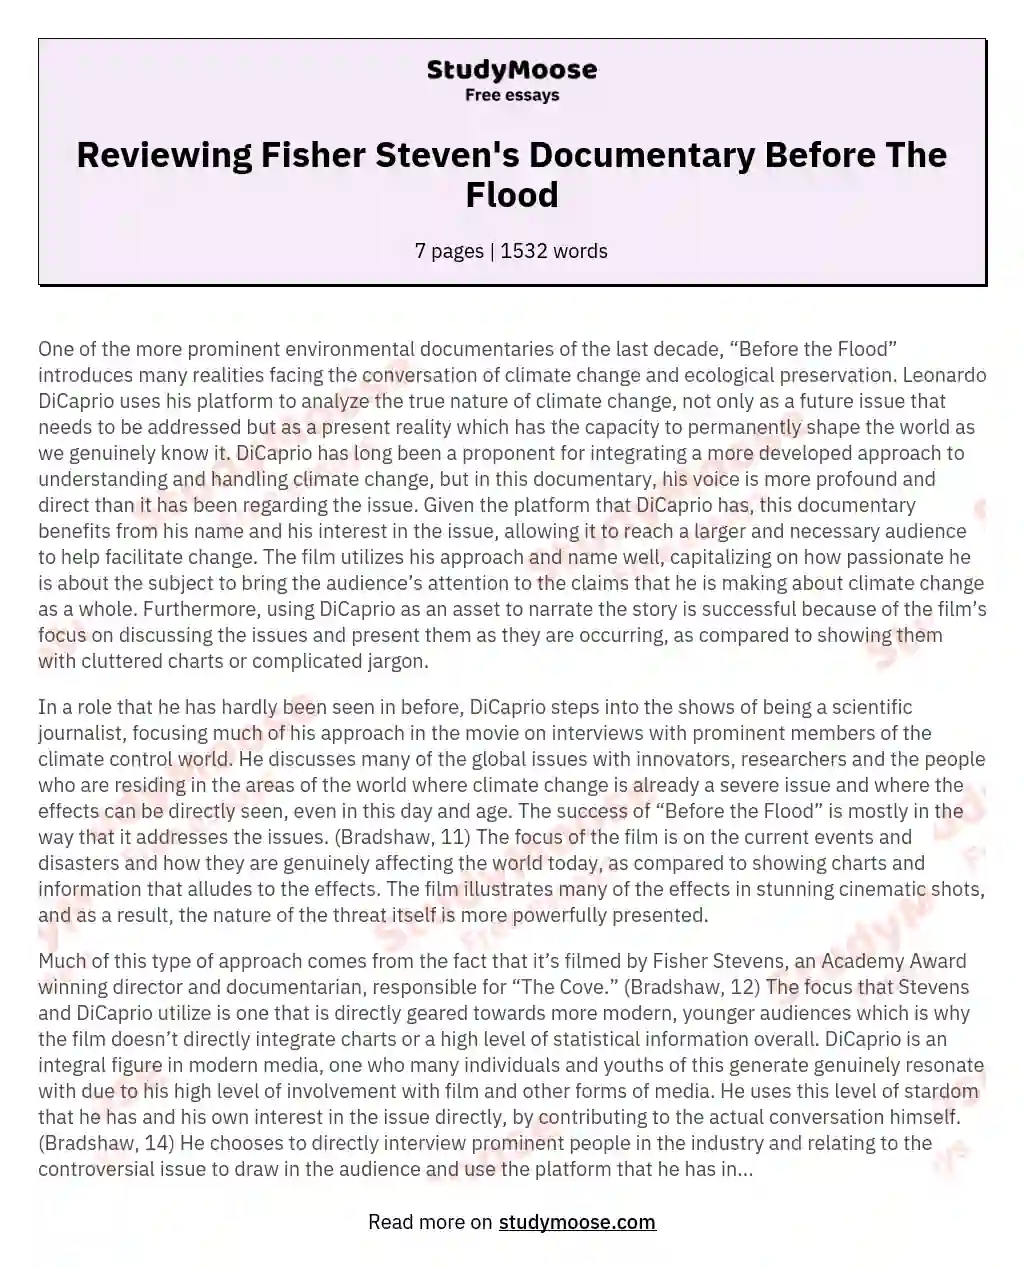 Reviewing Fisher Steven's Documentary Before The Flood essay